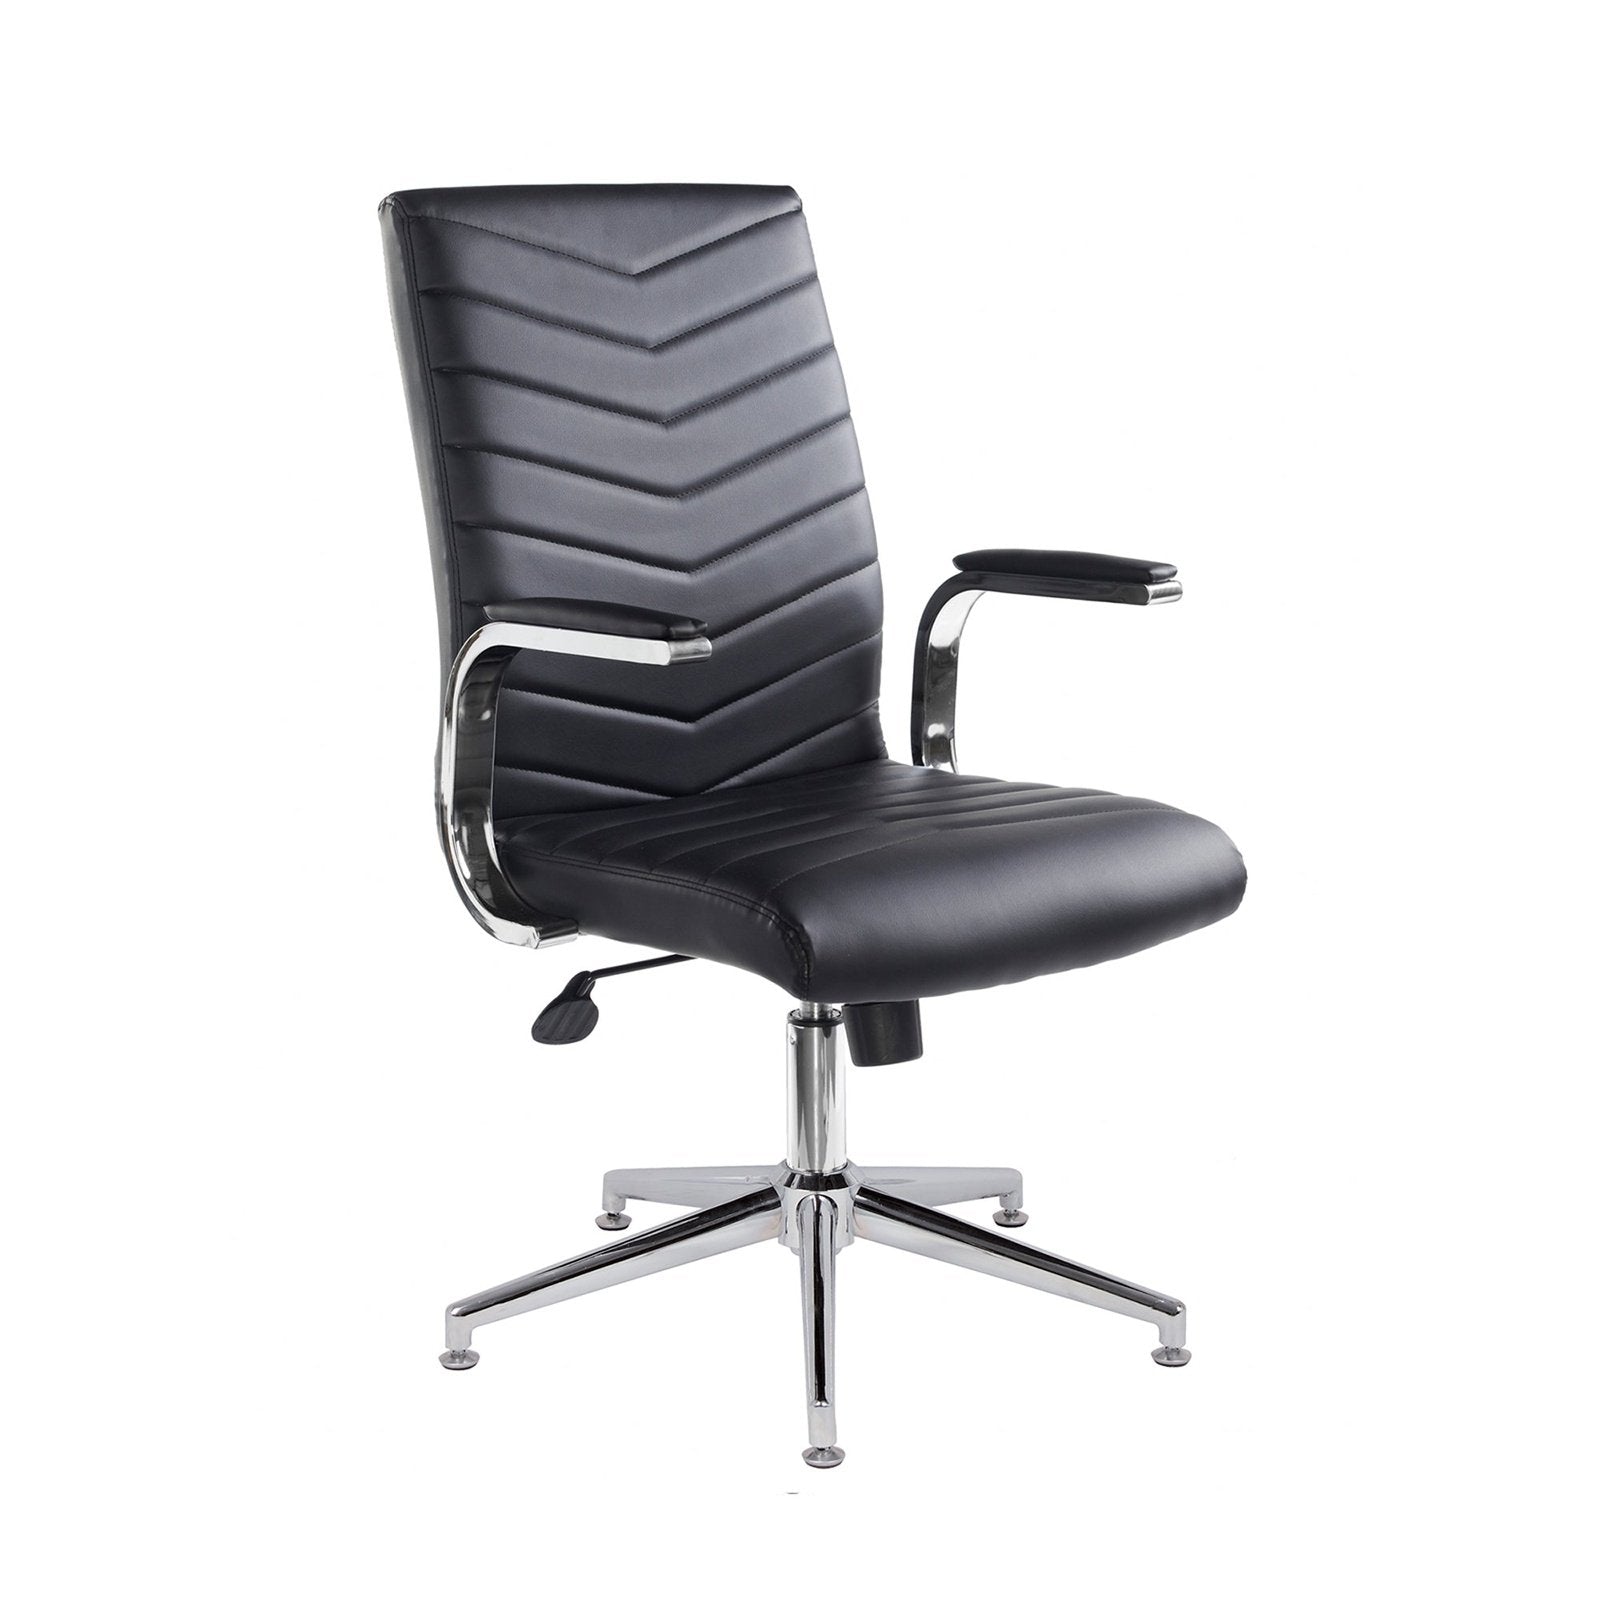 Martinez high back managers chair - Office Products Online